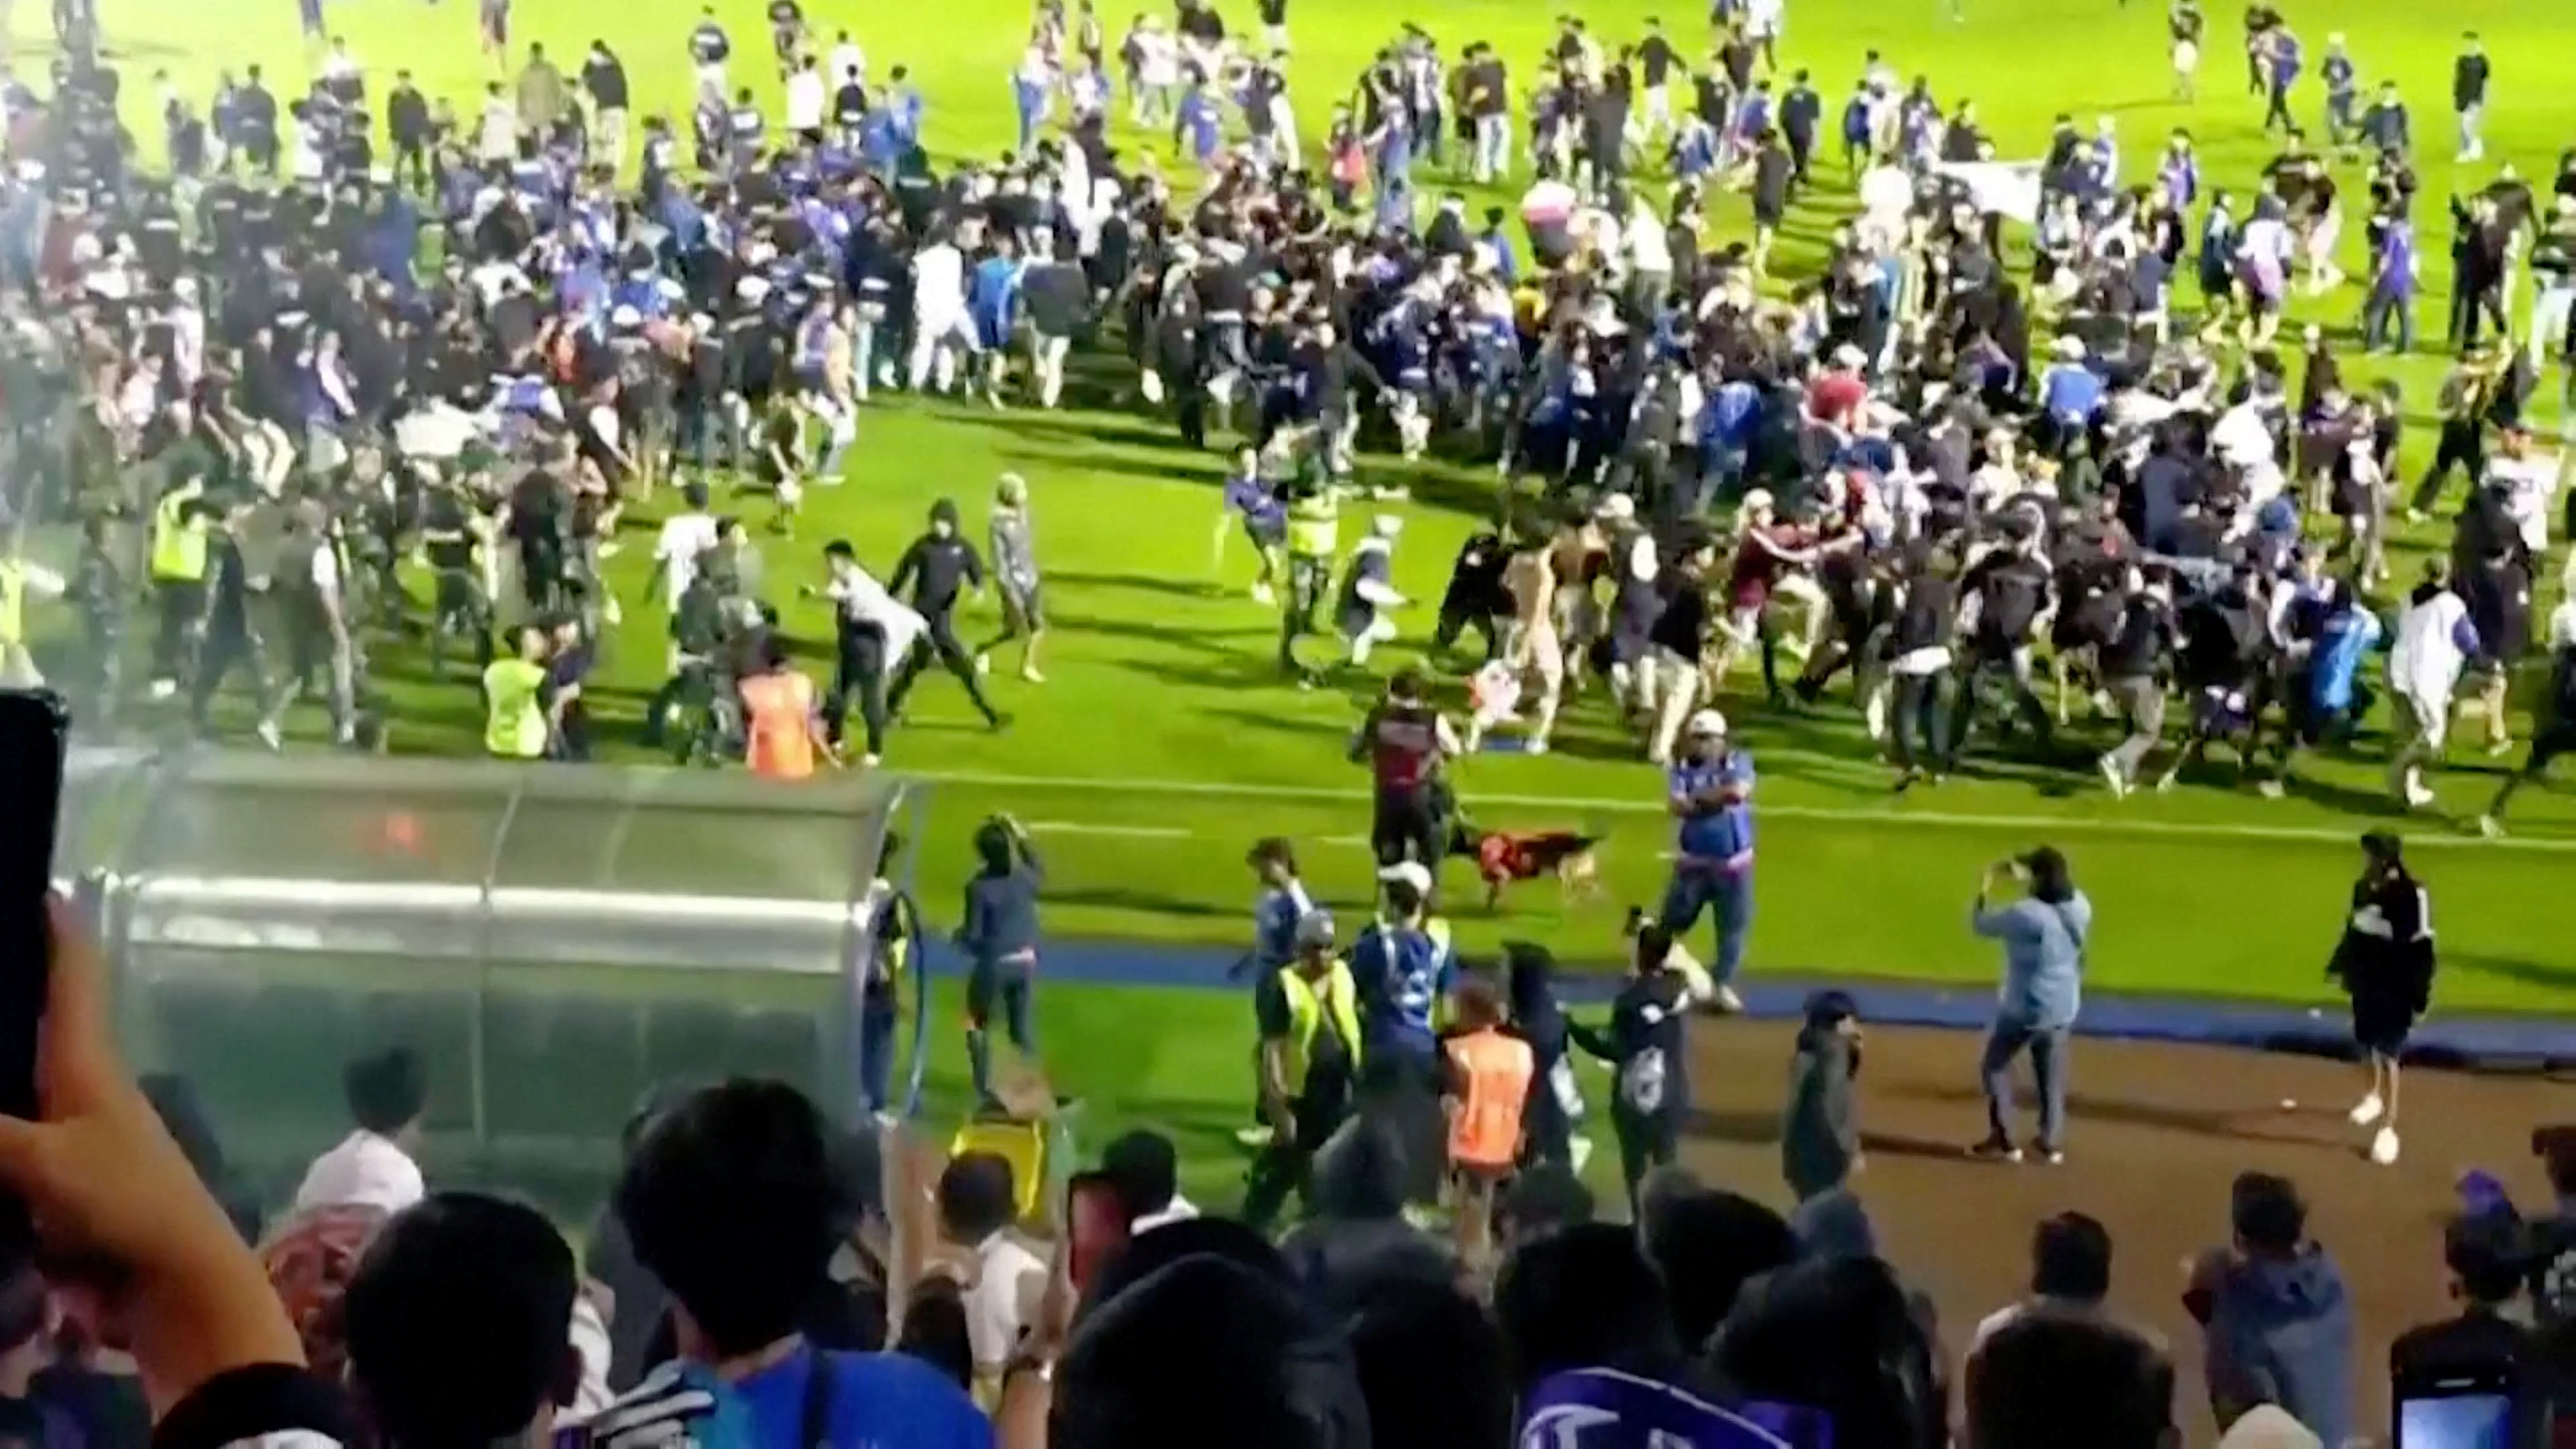 Riot breaks out after football match between Arema vs Persebaya in Malang